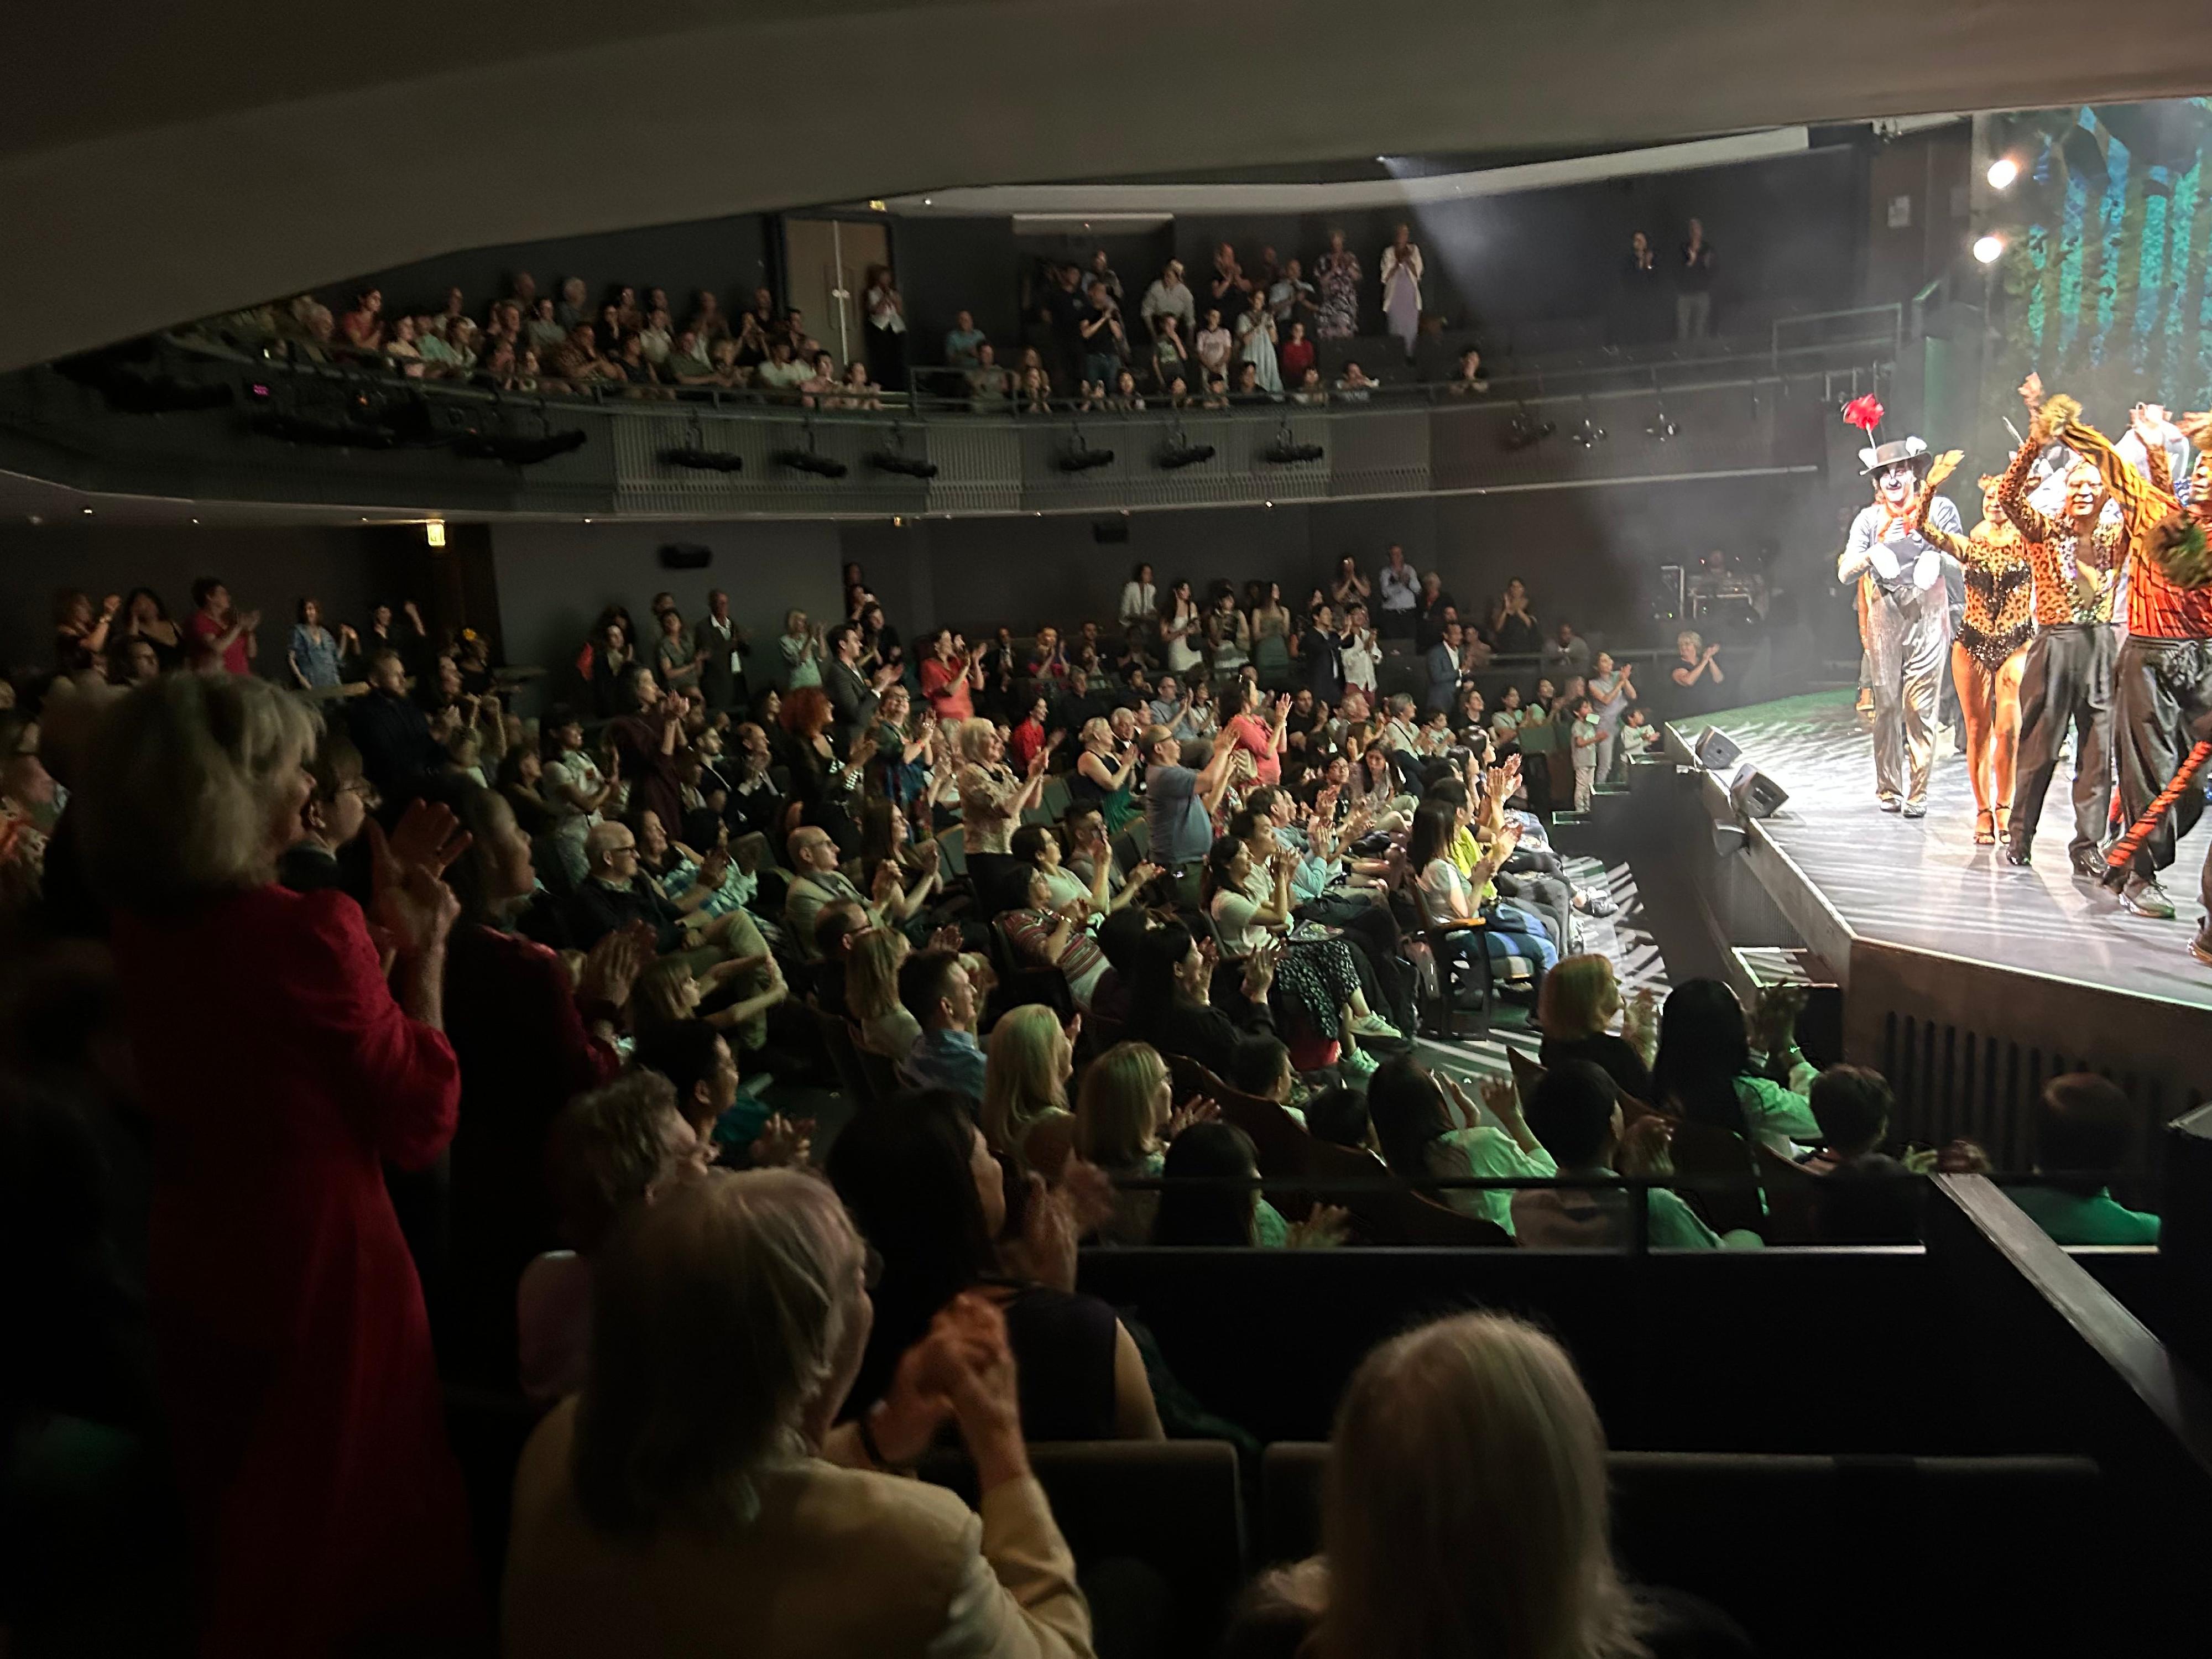 The Hong Kong Economic and Trade Office, London (London ETO) supported the UK premiere of WILD (The Musical), a captivating original production by the City Chamber Orchestra of Hong Kong (CCOHK), at the FUSE International festival at Rose Theatre, London on July 6 and 7 (London time). Photo shows the audience applauding at the end of the performance.